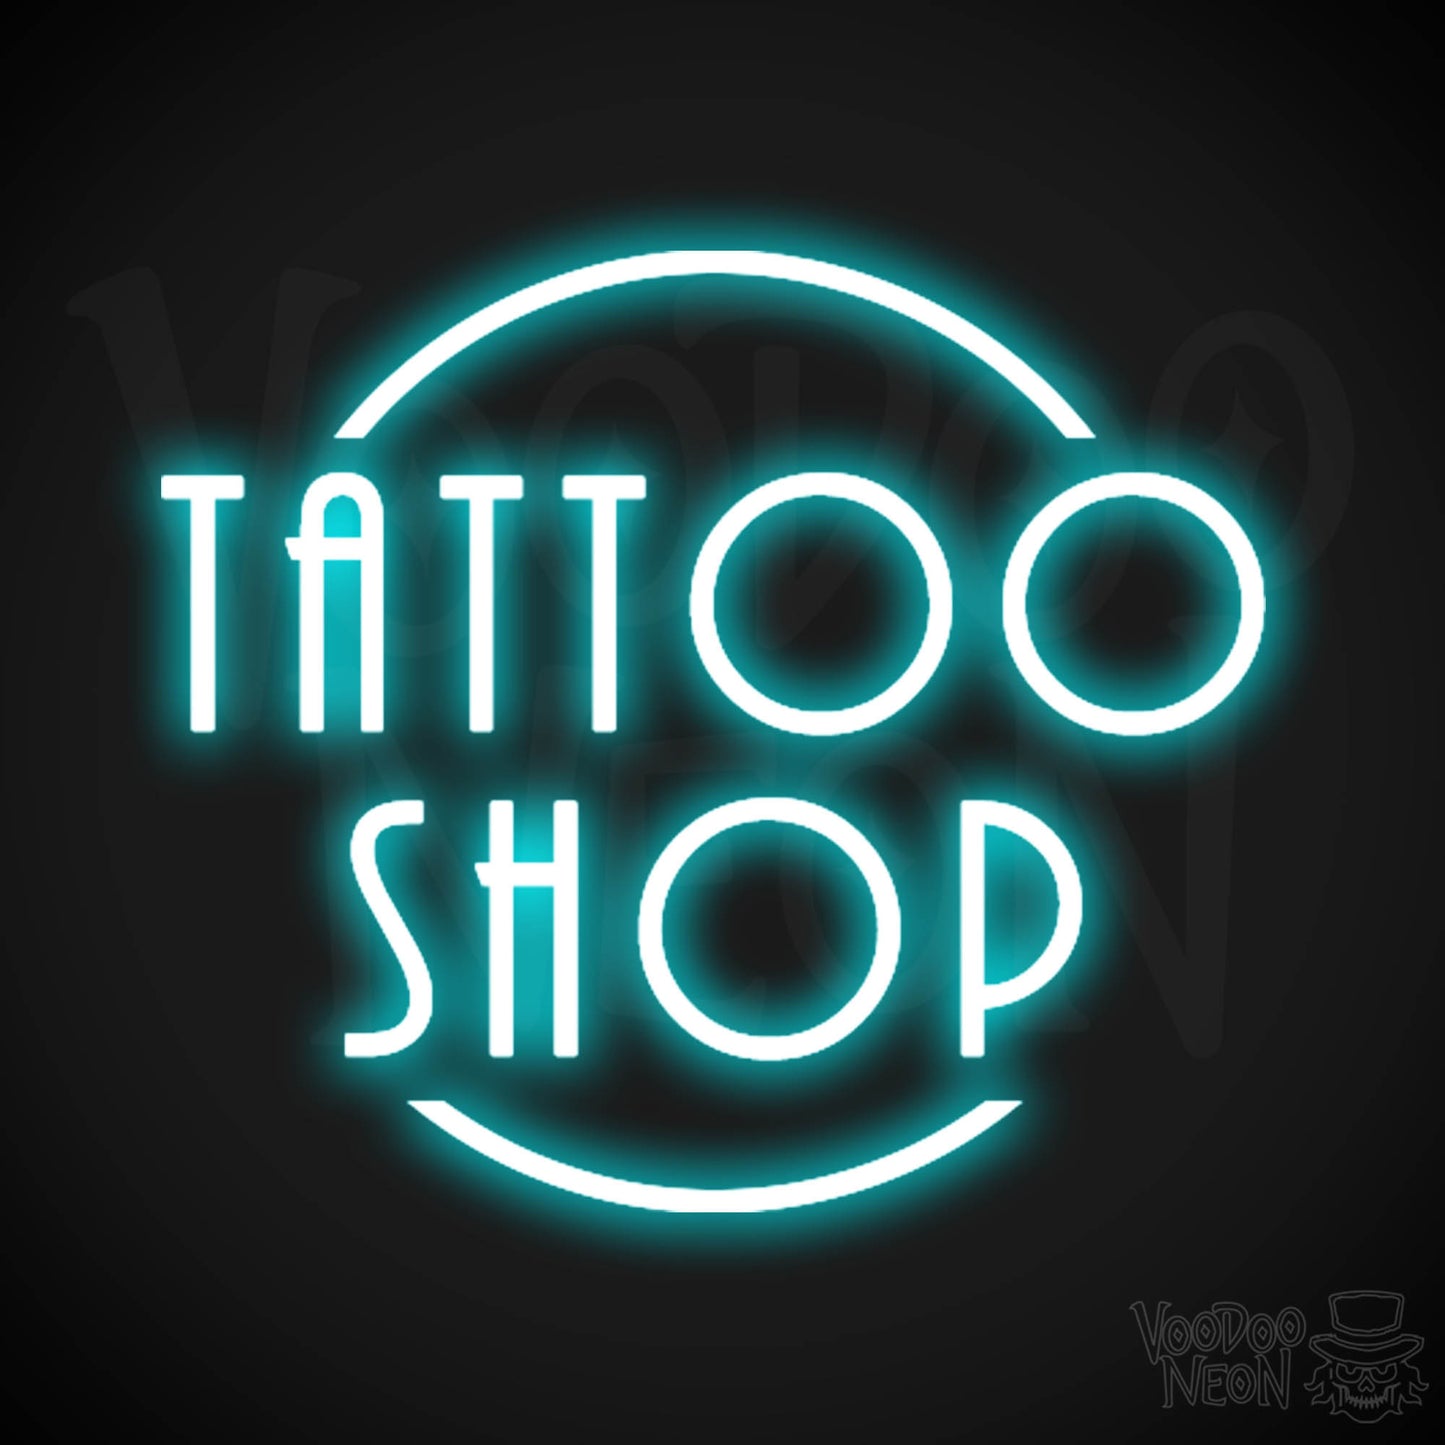 Tattoo Shop Neon Sign - Neon Tattoo Shop Sign - Tattoo Sign - Color Ice Blue